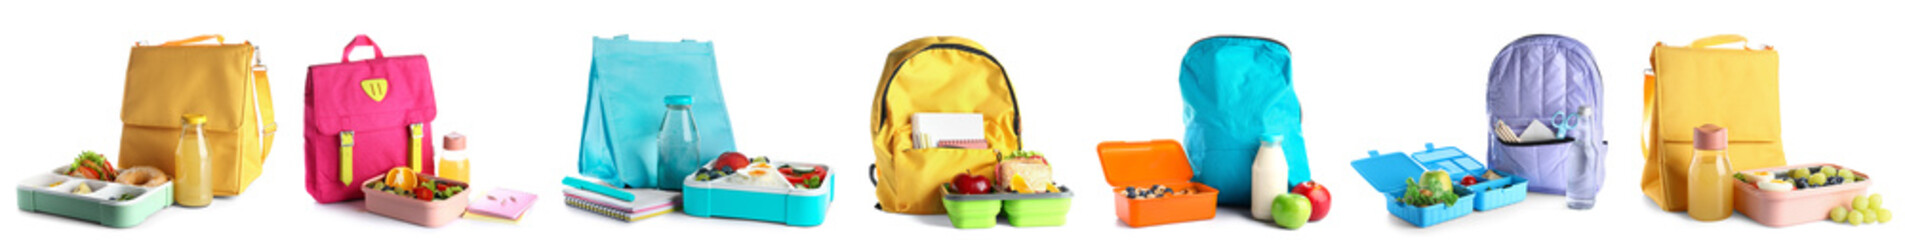 Collage of plastic lunch boxes with tasty food, stationery and bags on white background